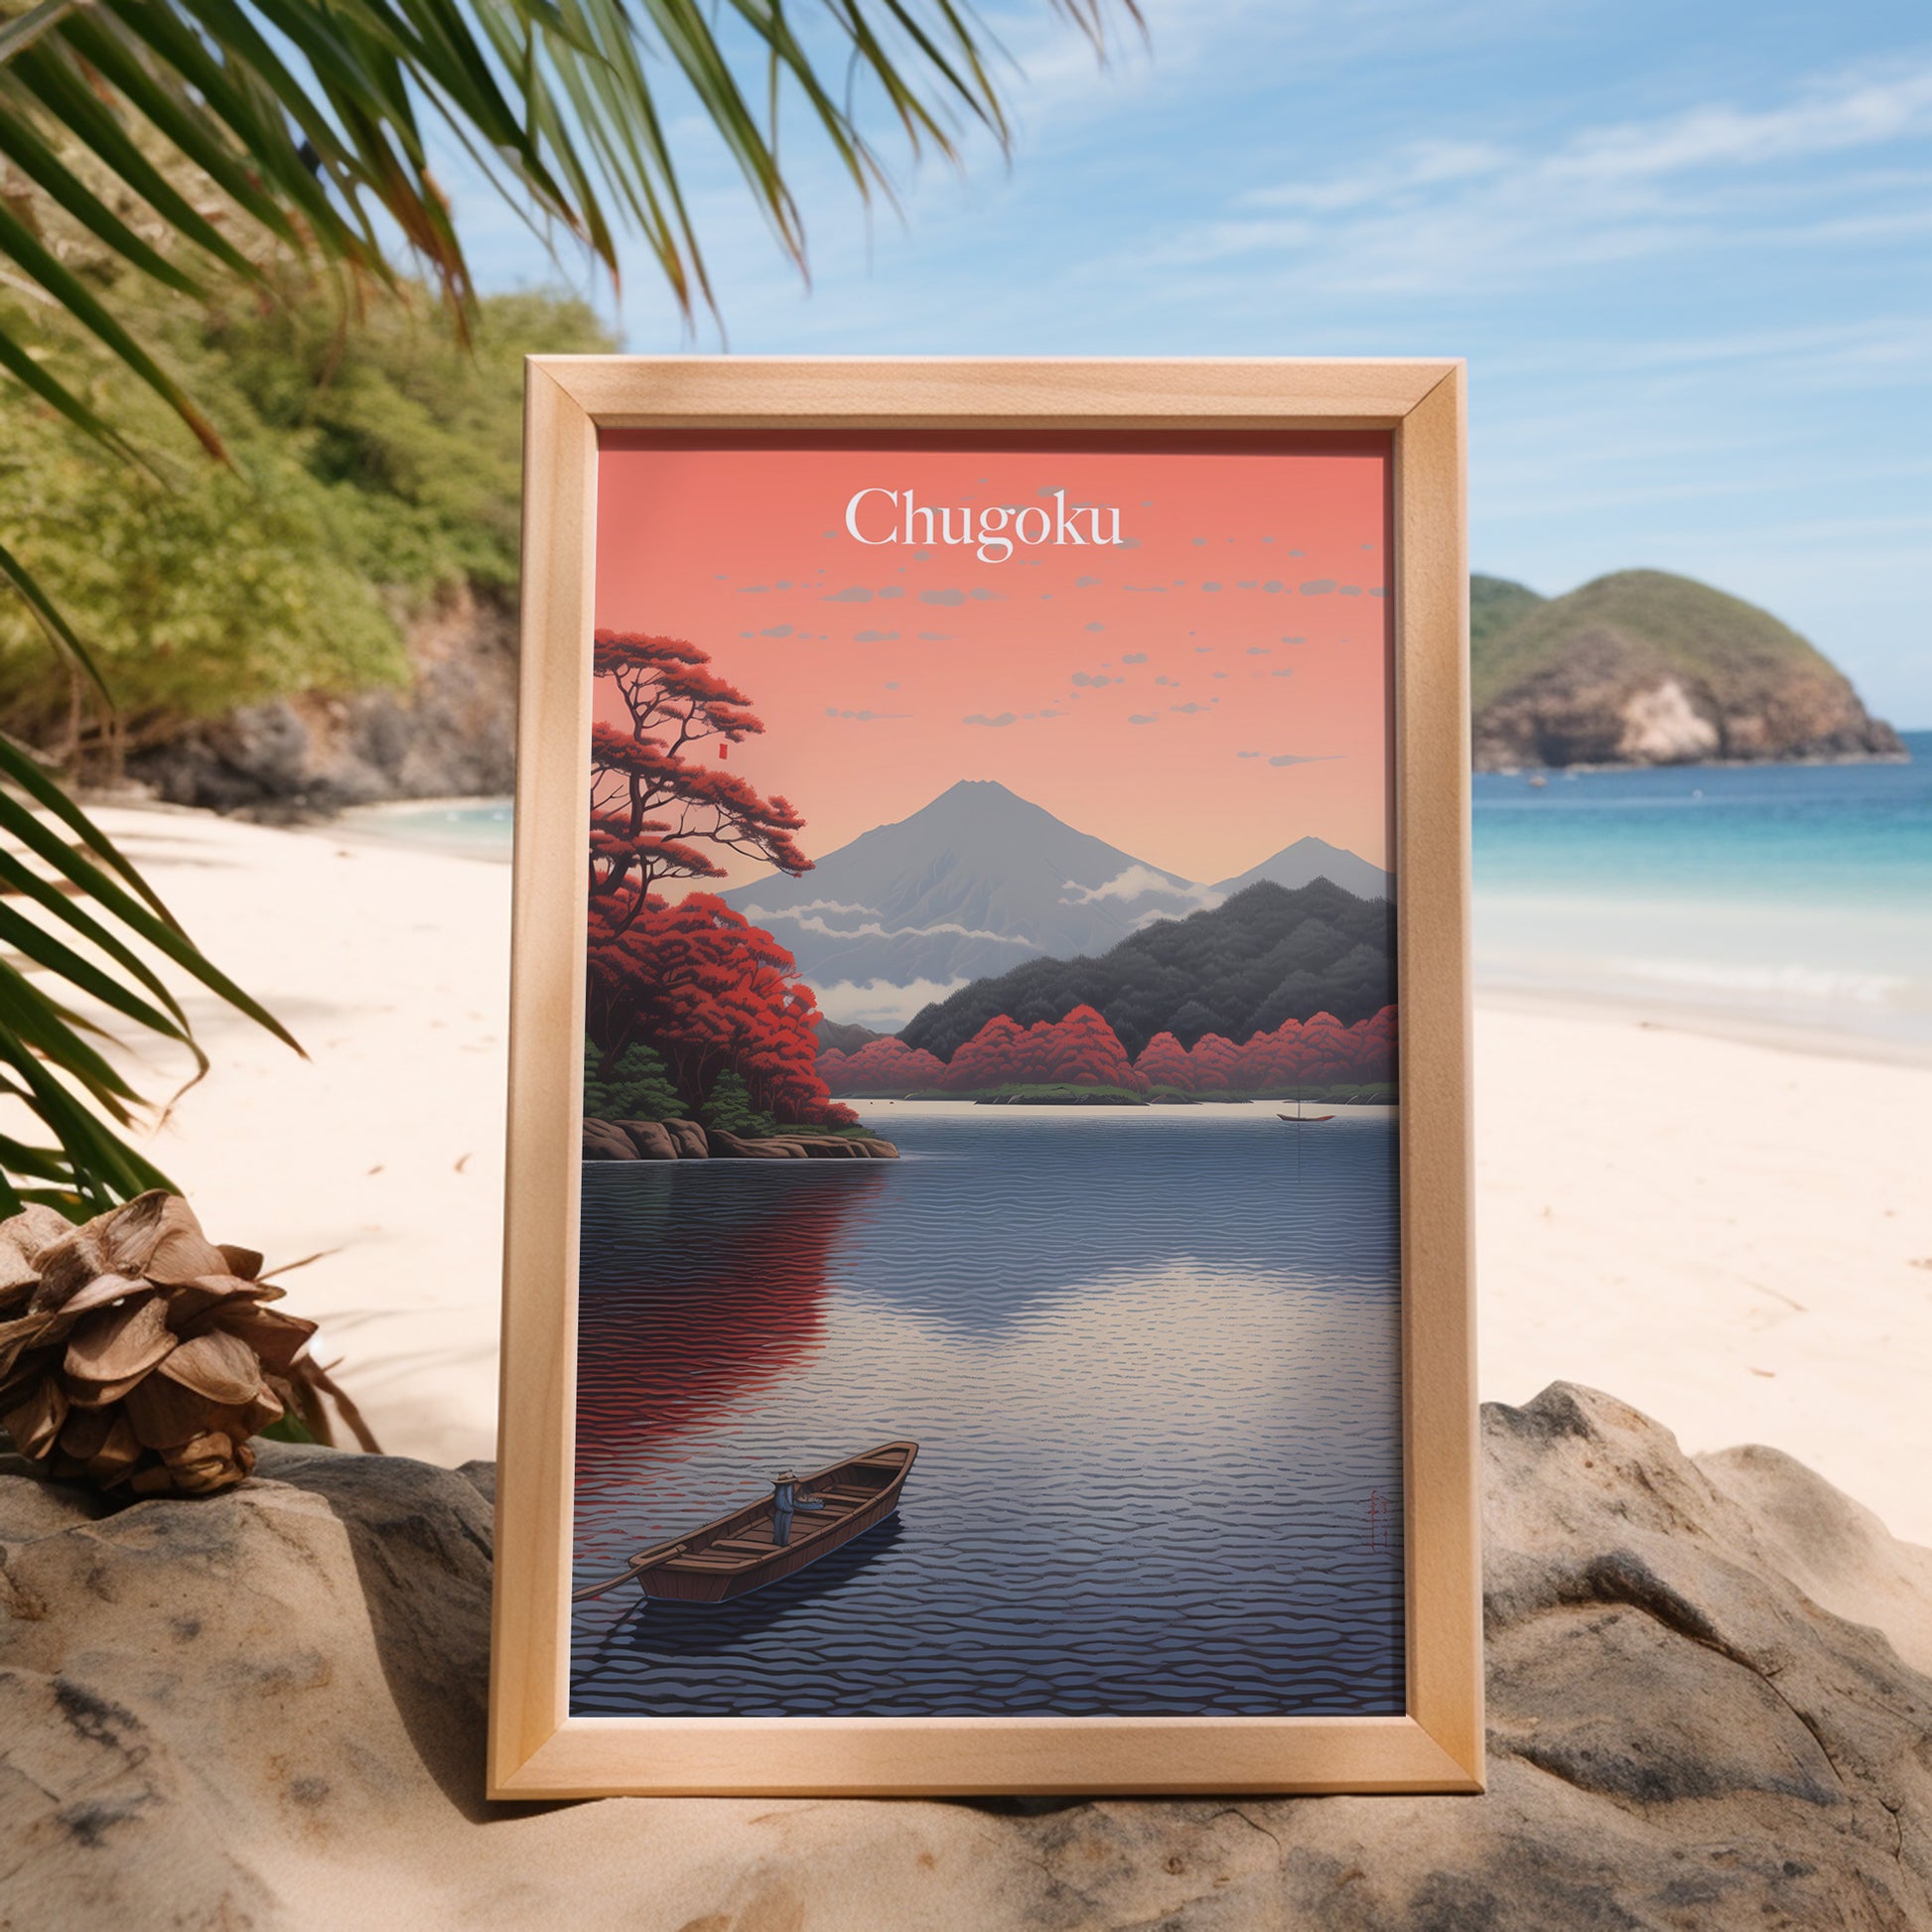 Framed artwork of a mountain landscape with a lake, placed on a sandy beach.